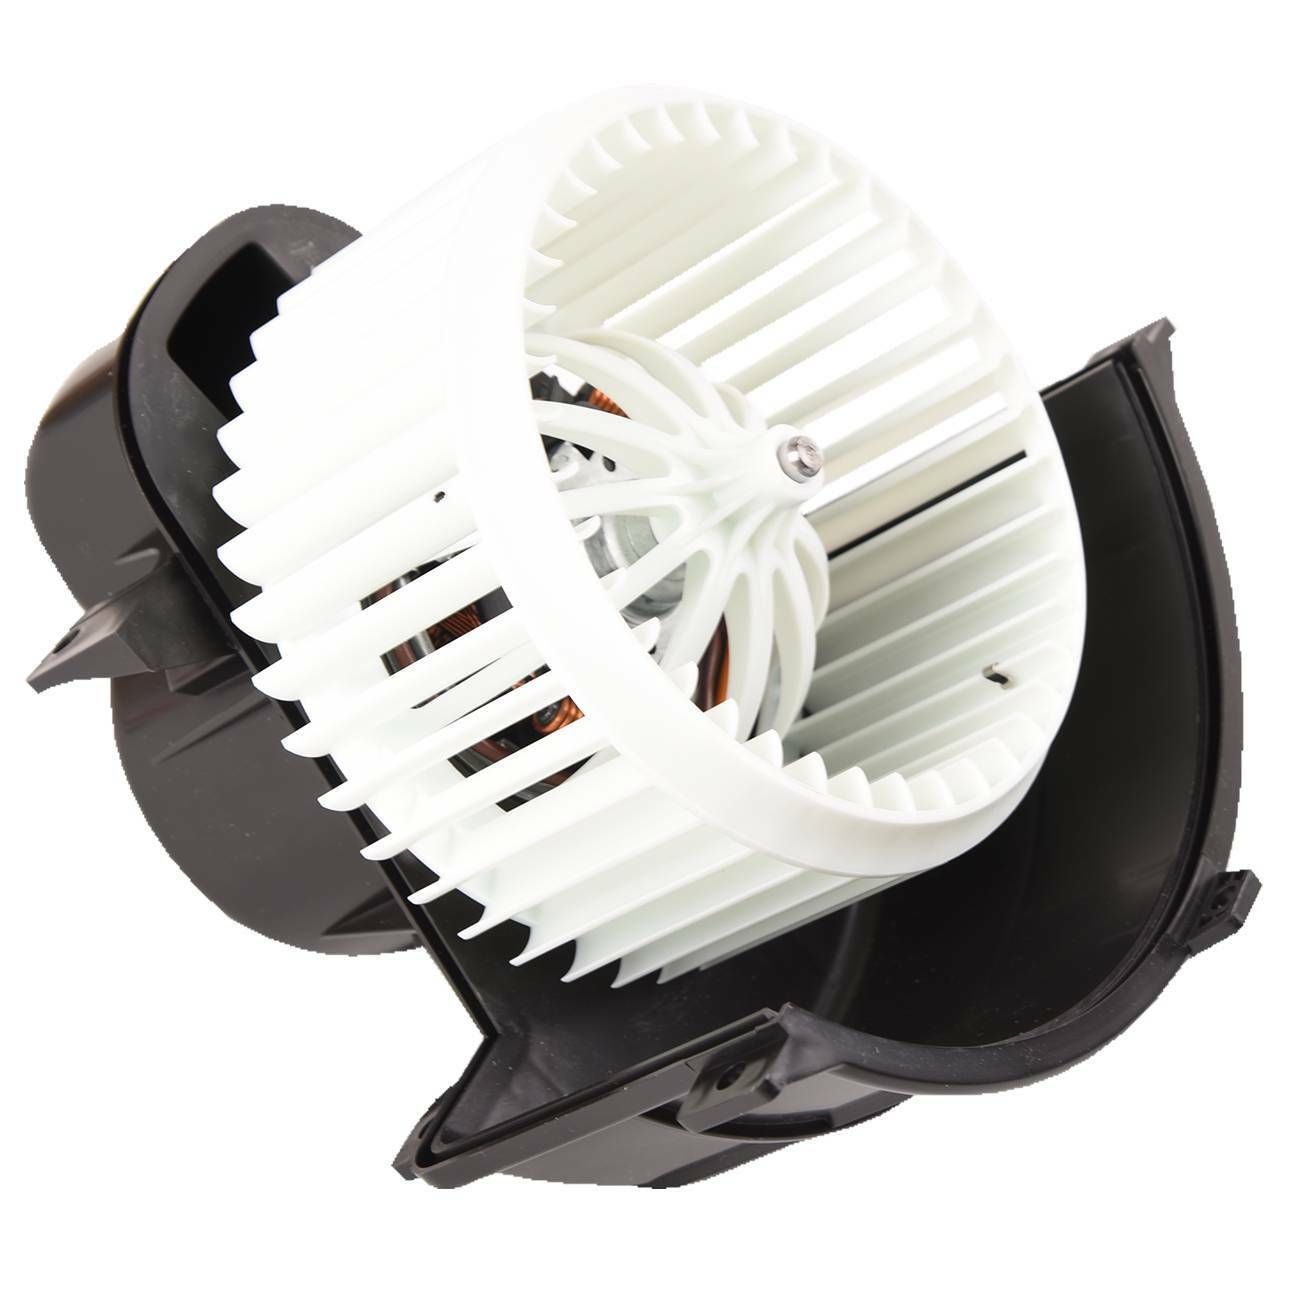 New Front A/C Heater Blower Motor w/ Fan Cage For Touareg Q7 Cayenne 7L0820021Q